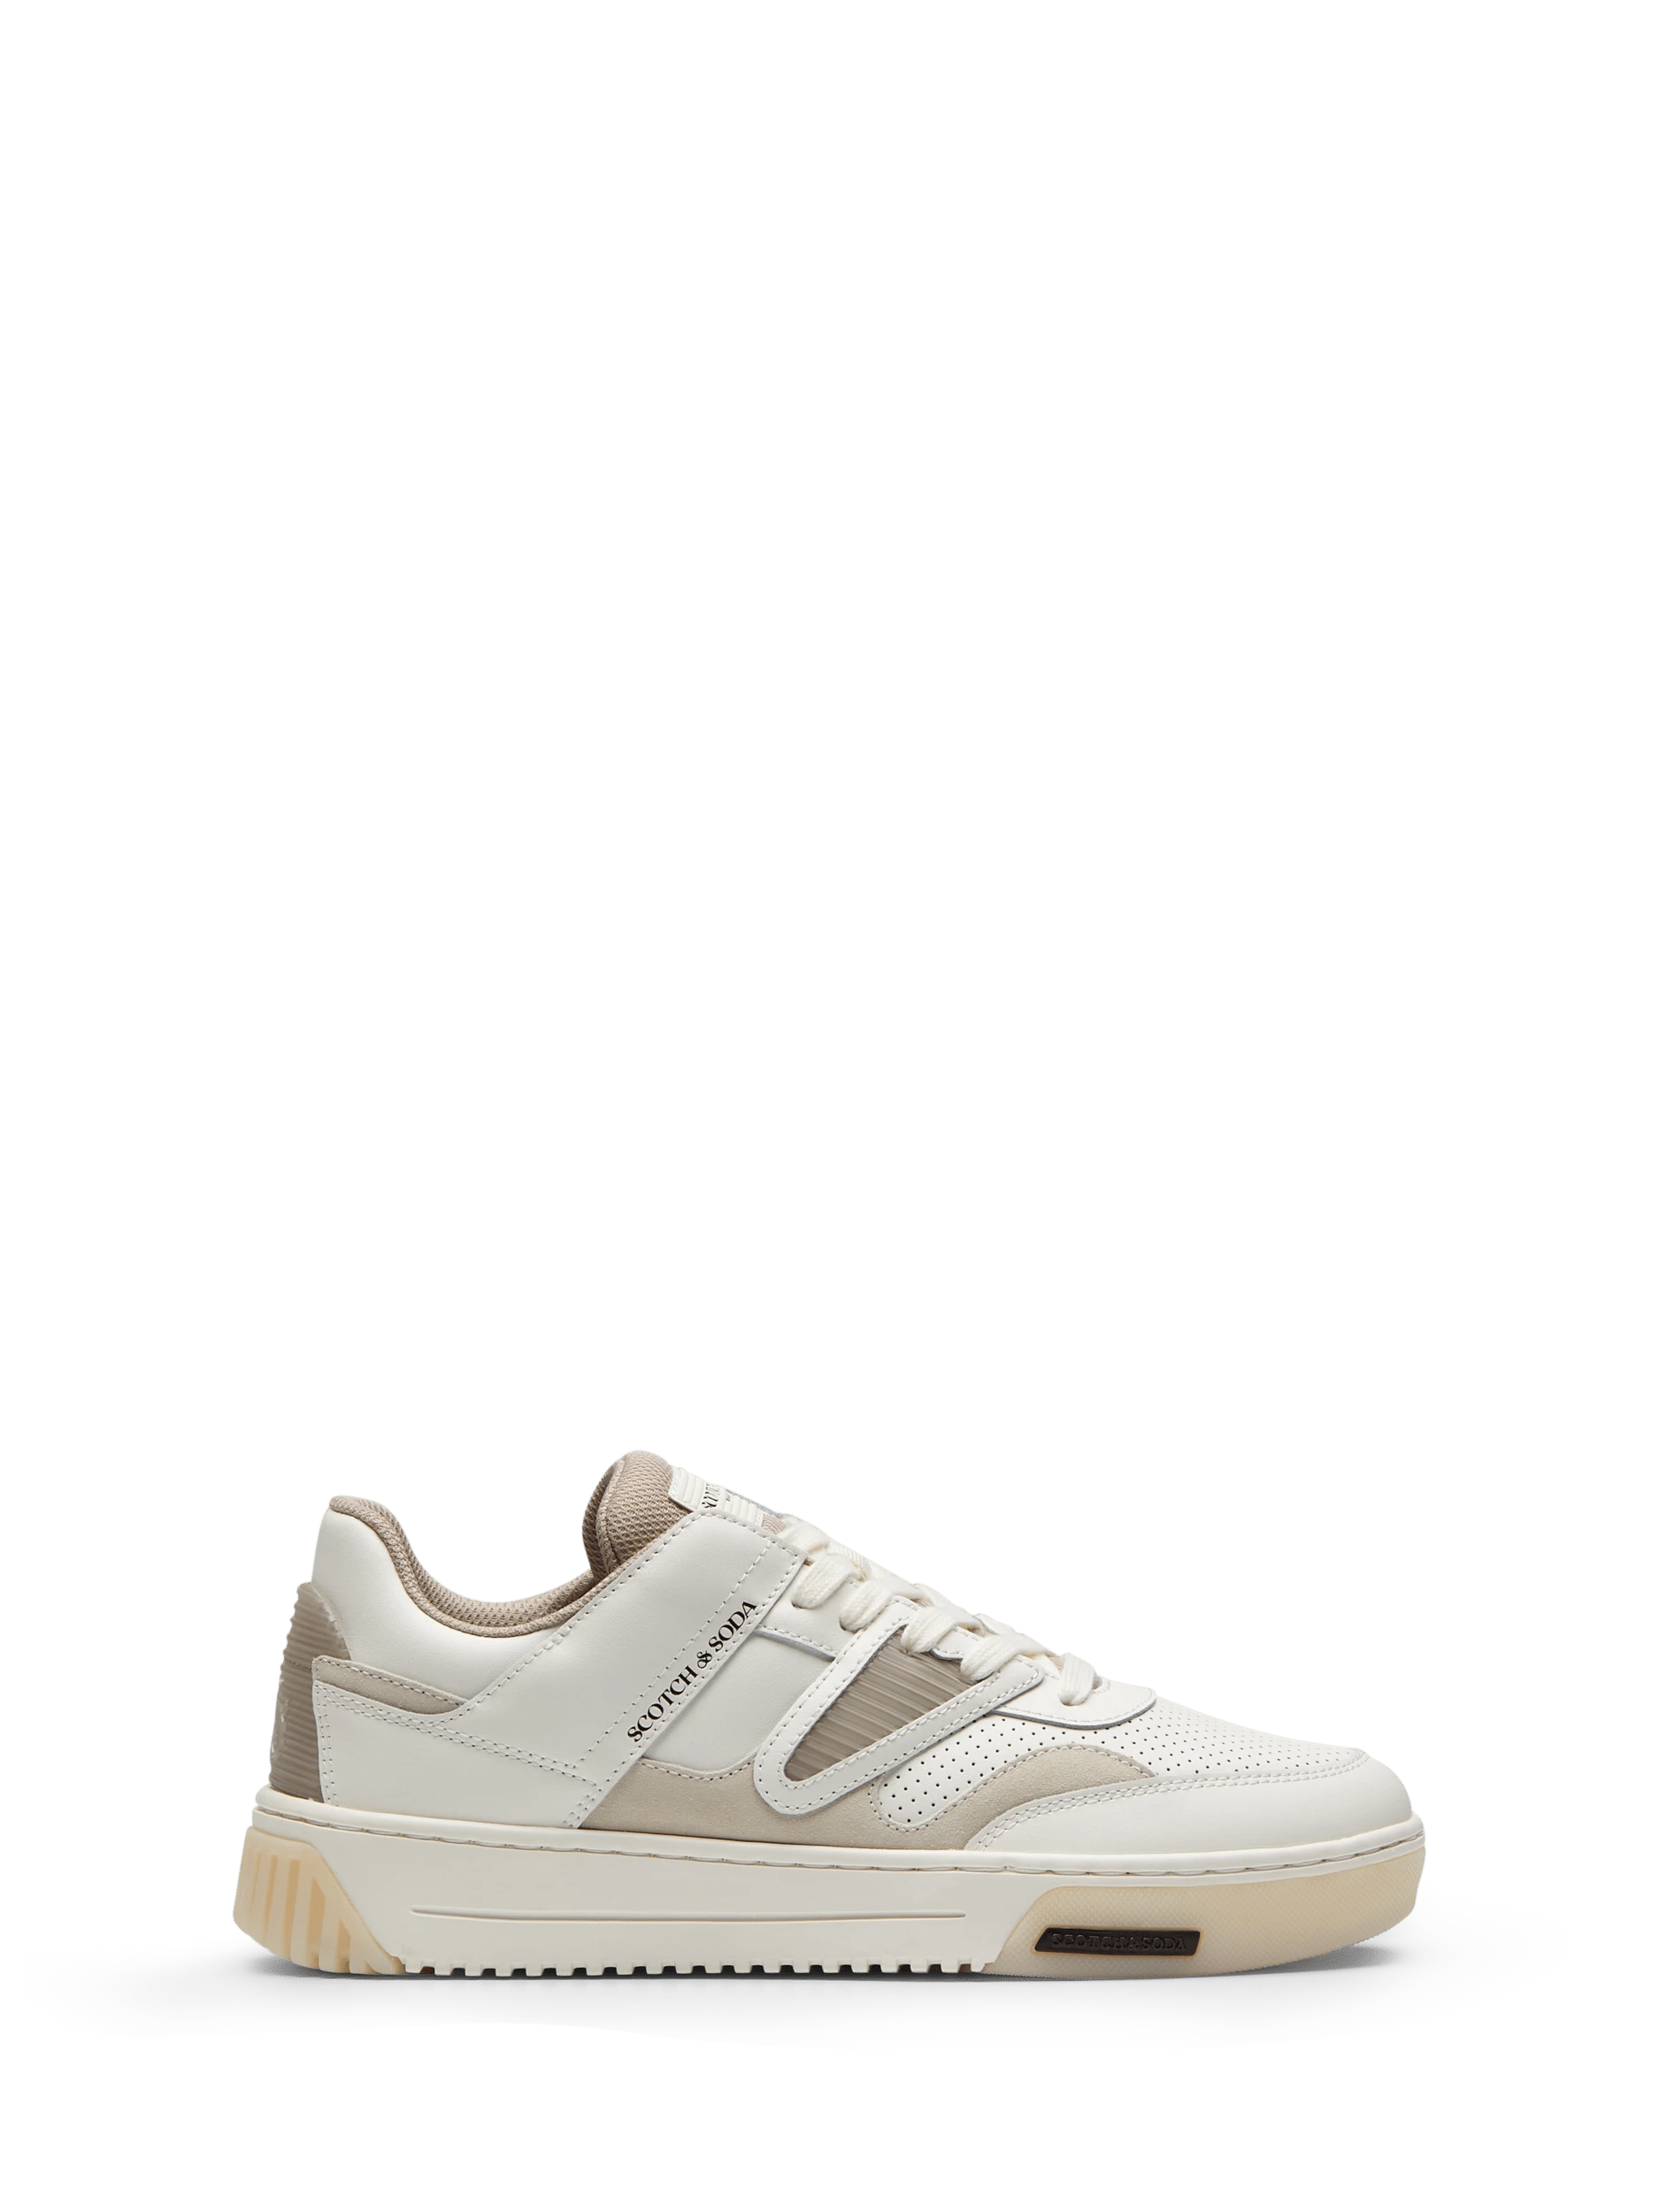 Scotch & Soda New Cup leather & suede sneaker SDE